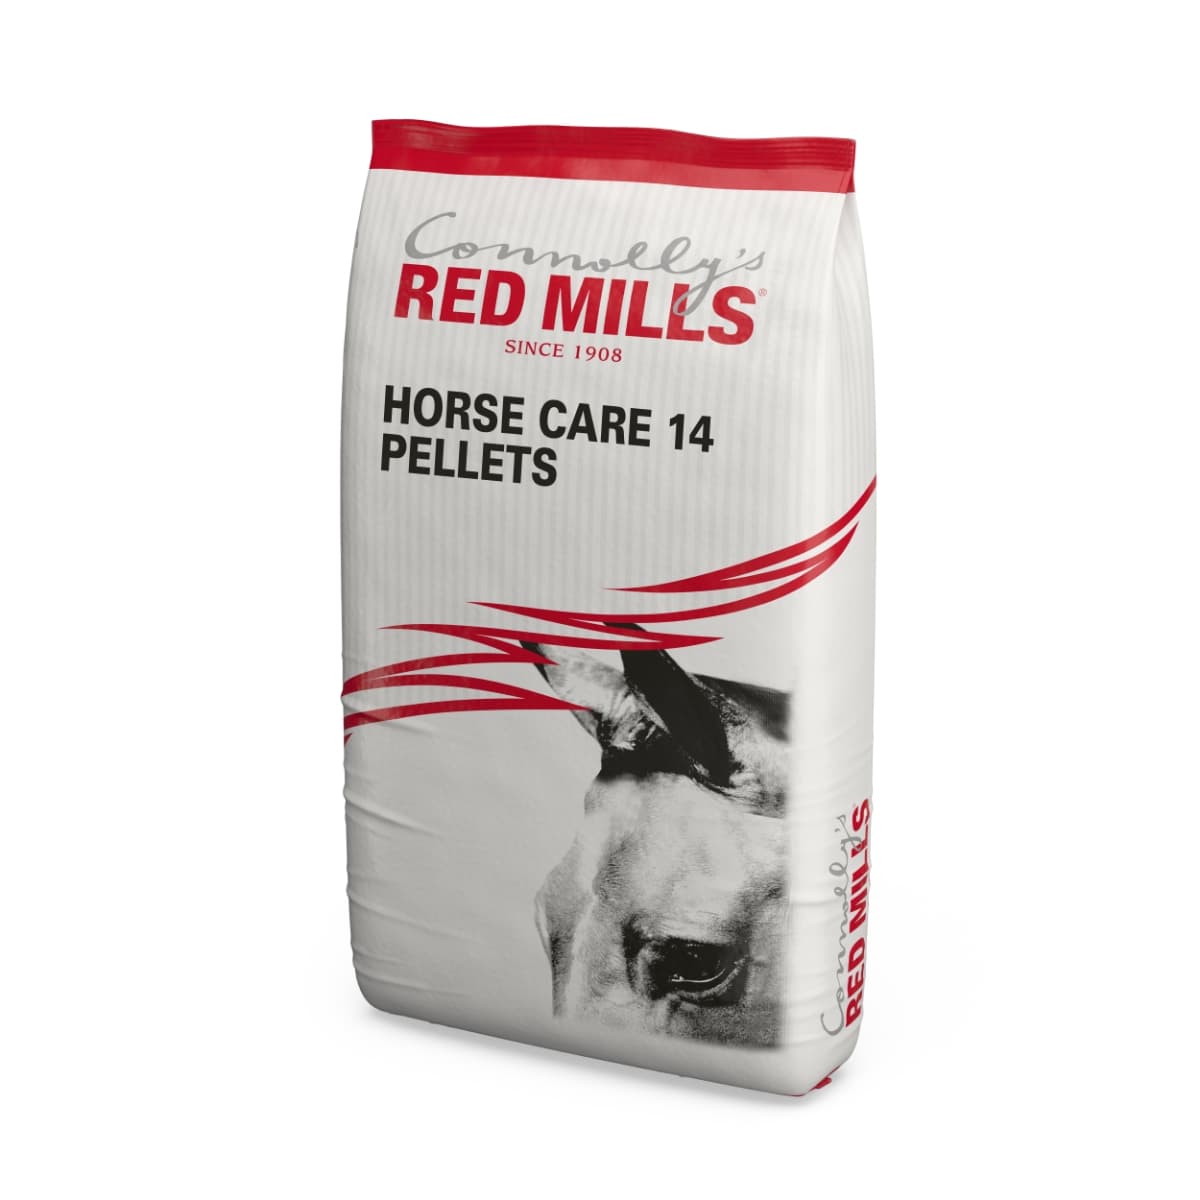 RED MILLS Horse Care 14 Pellets